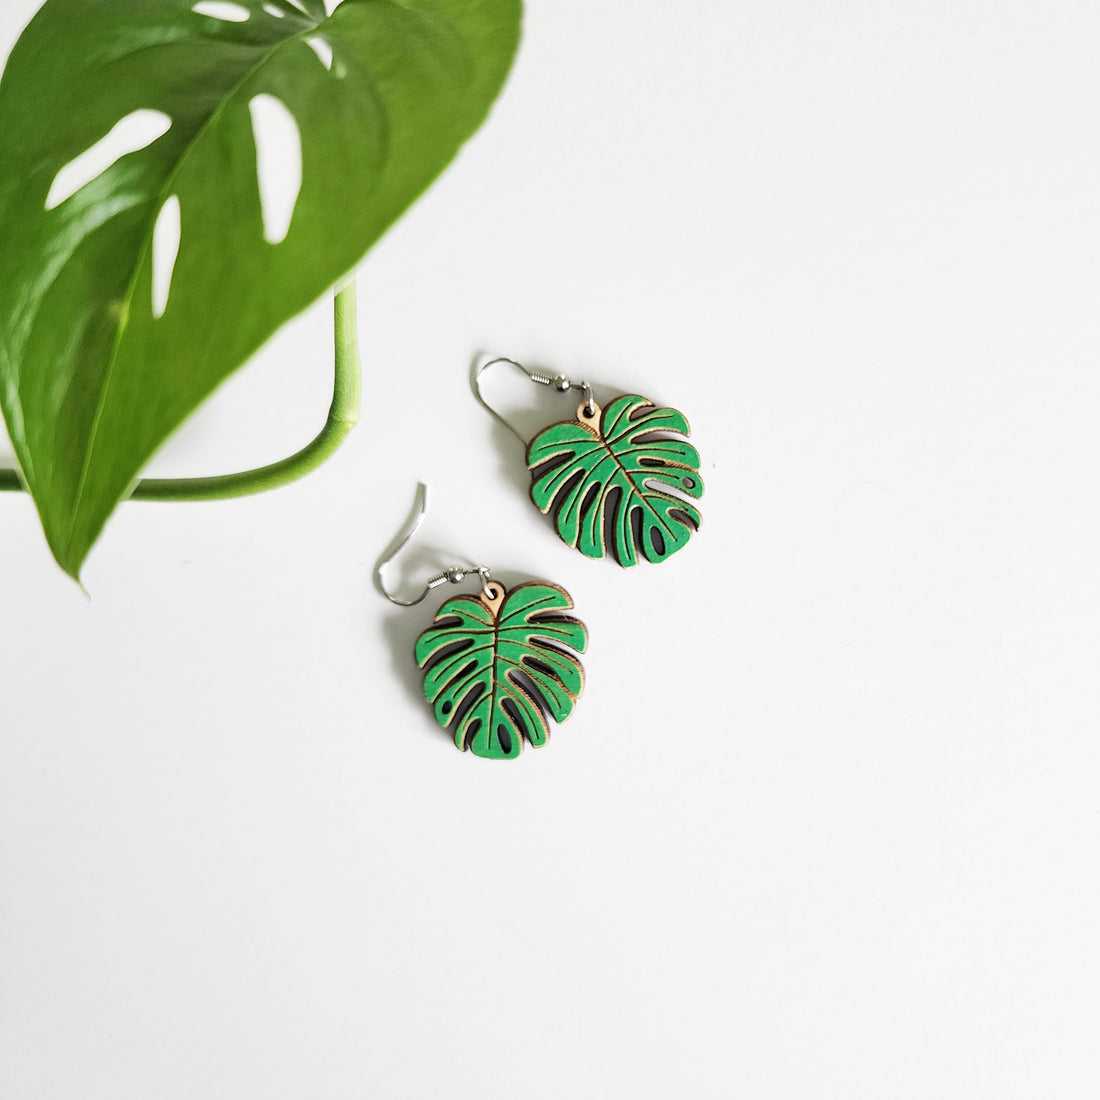 pair of monstera leaf earrings on a white background next to a leaf